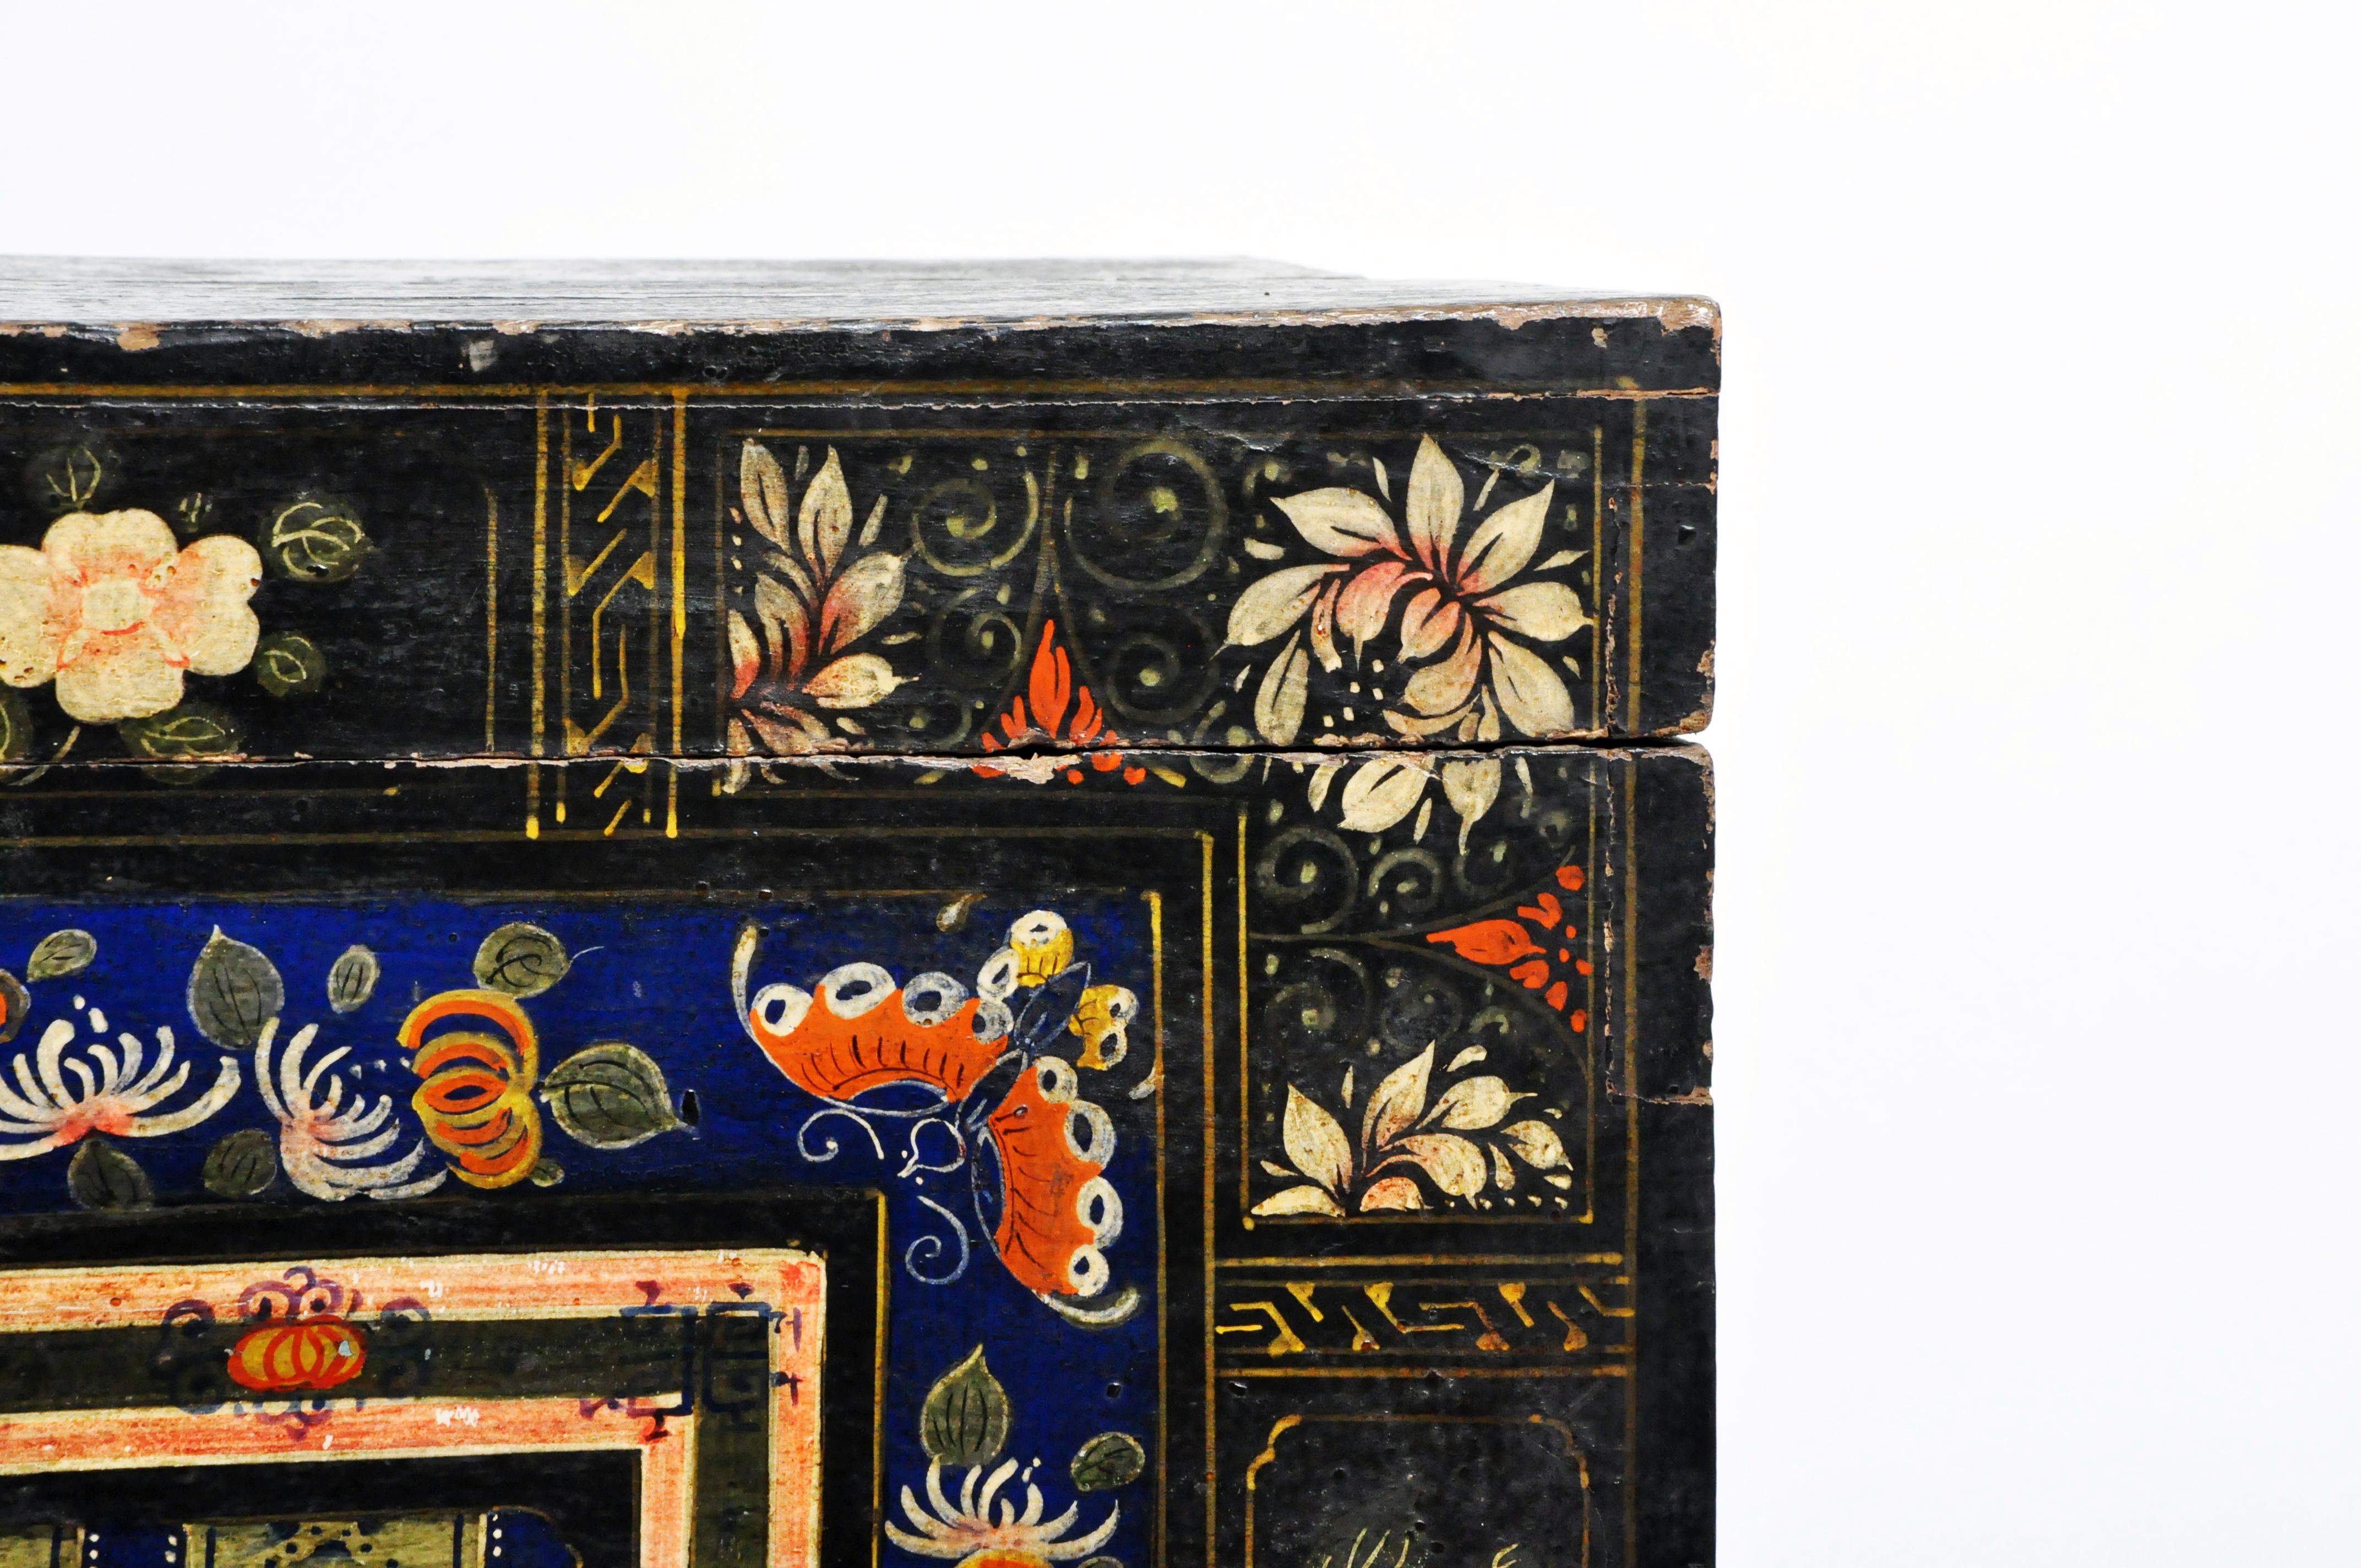 Late Qing Dynasty Storage Chest with Painting and Metal Base 1